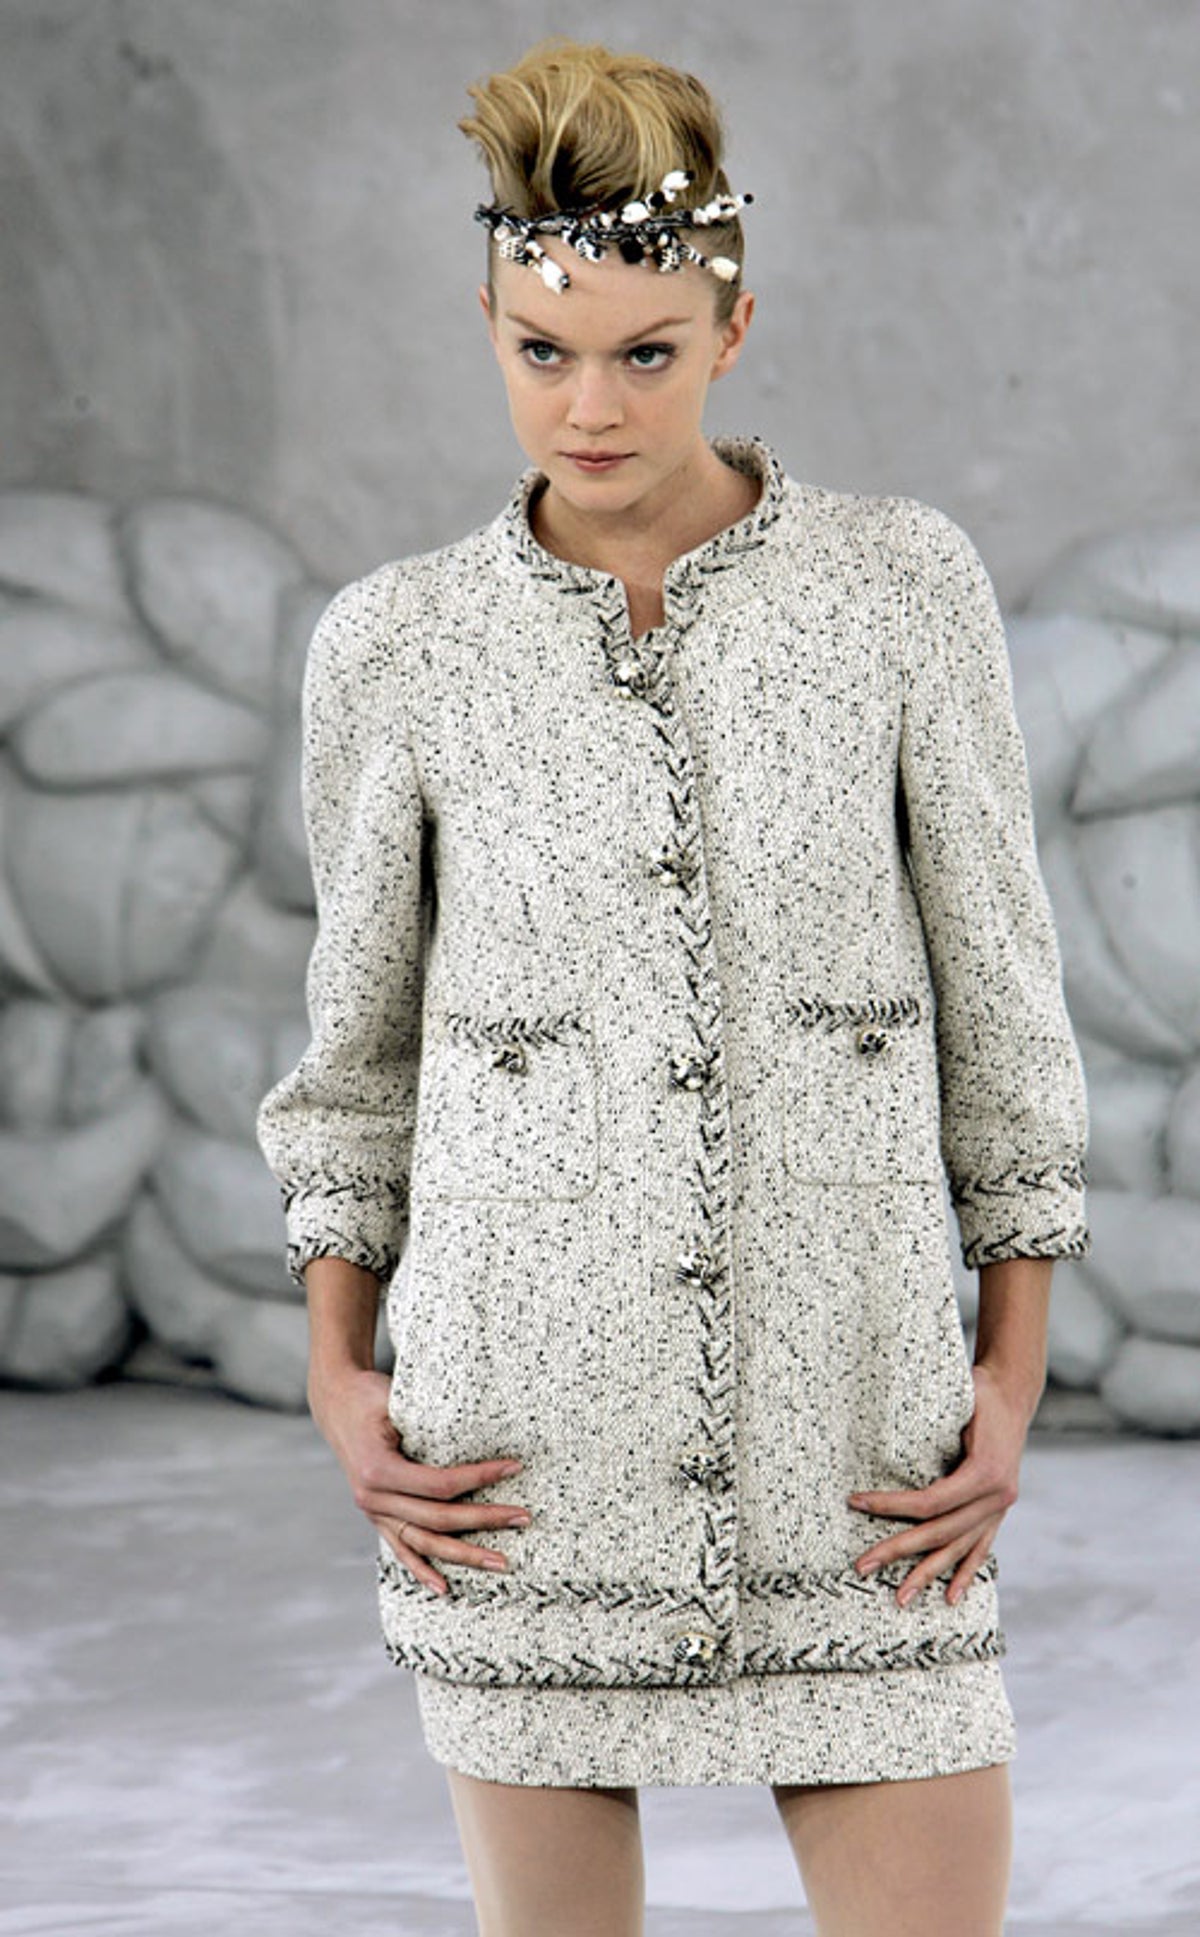 This Is The Makeup Version Of Chanel's Iconic Tweed Jacket